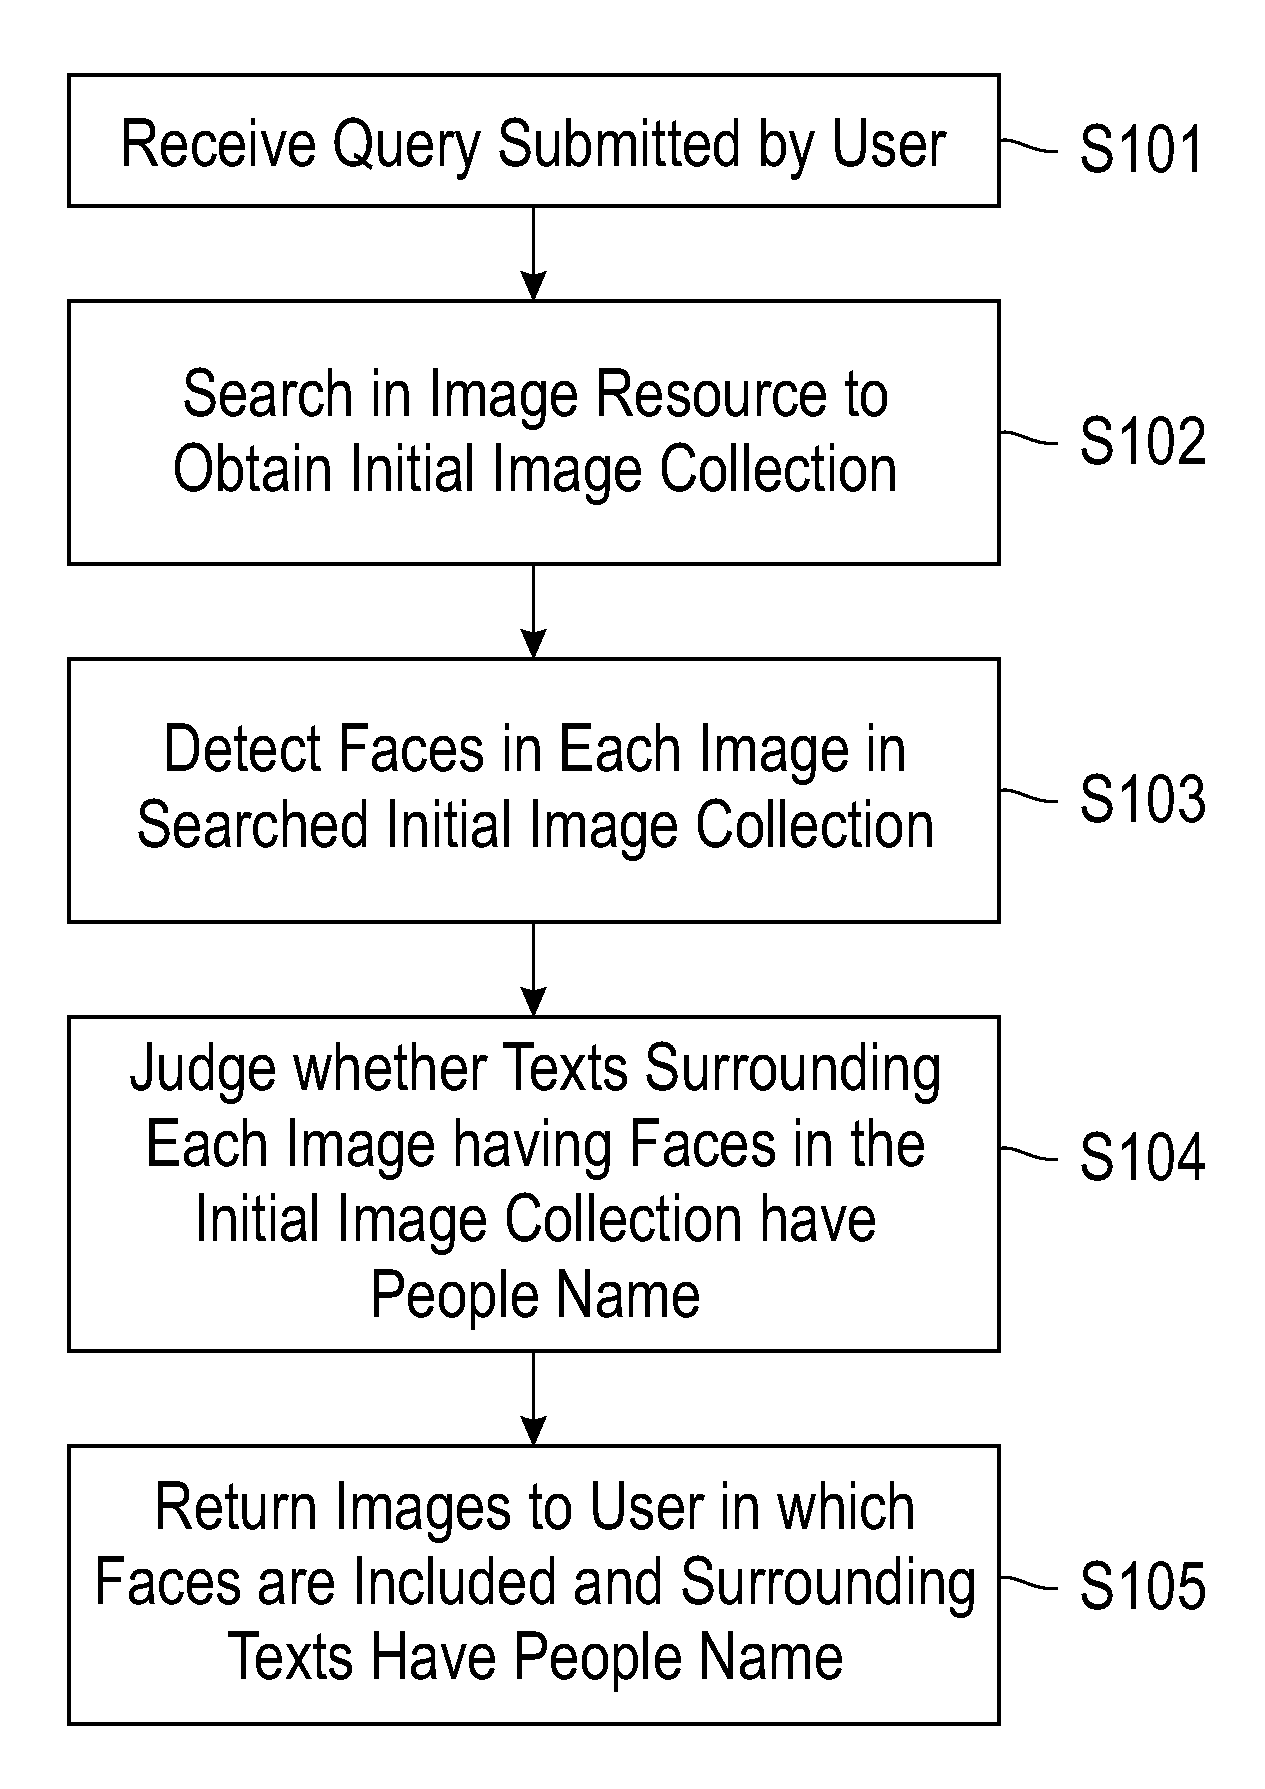 Image search using face detection